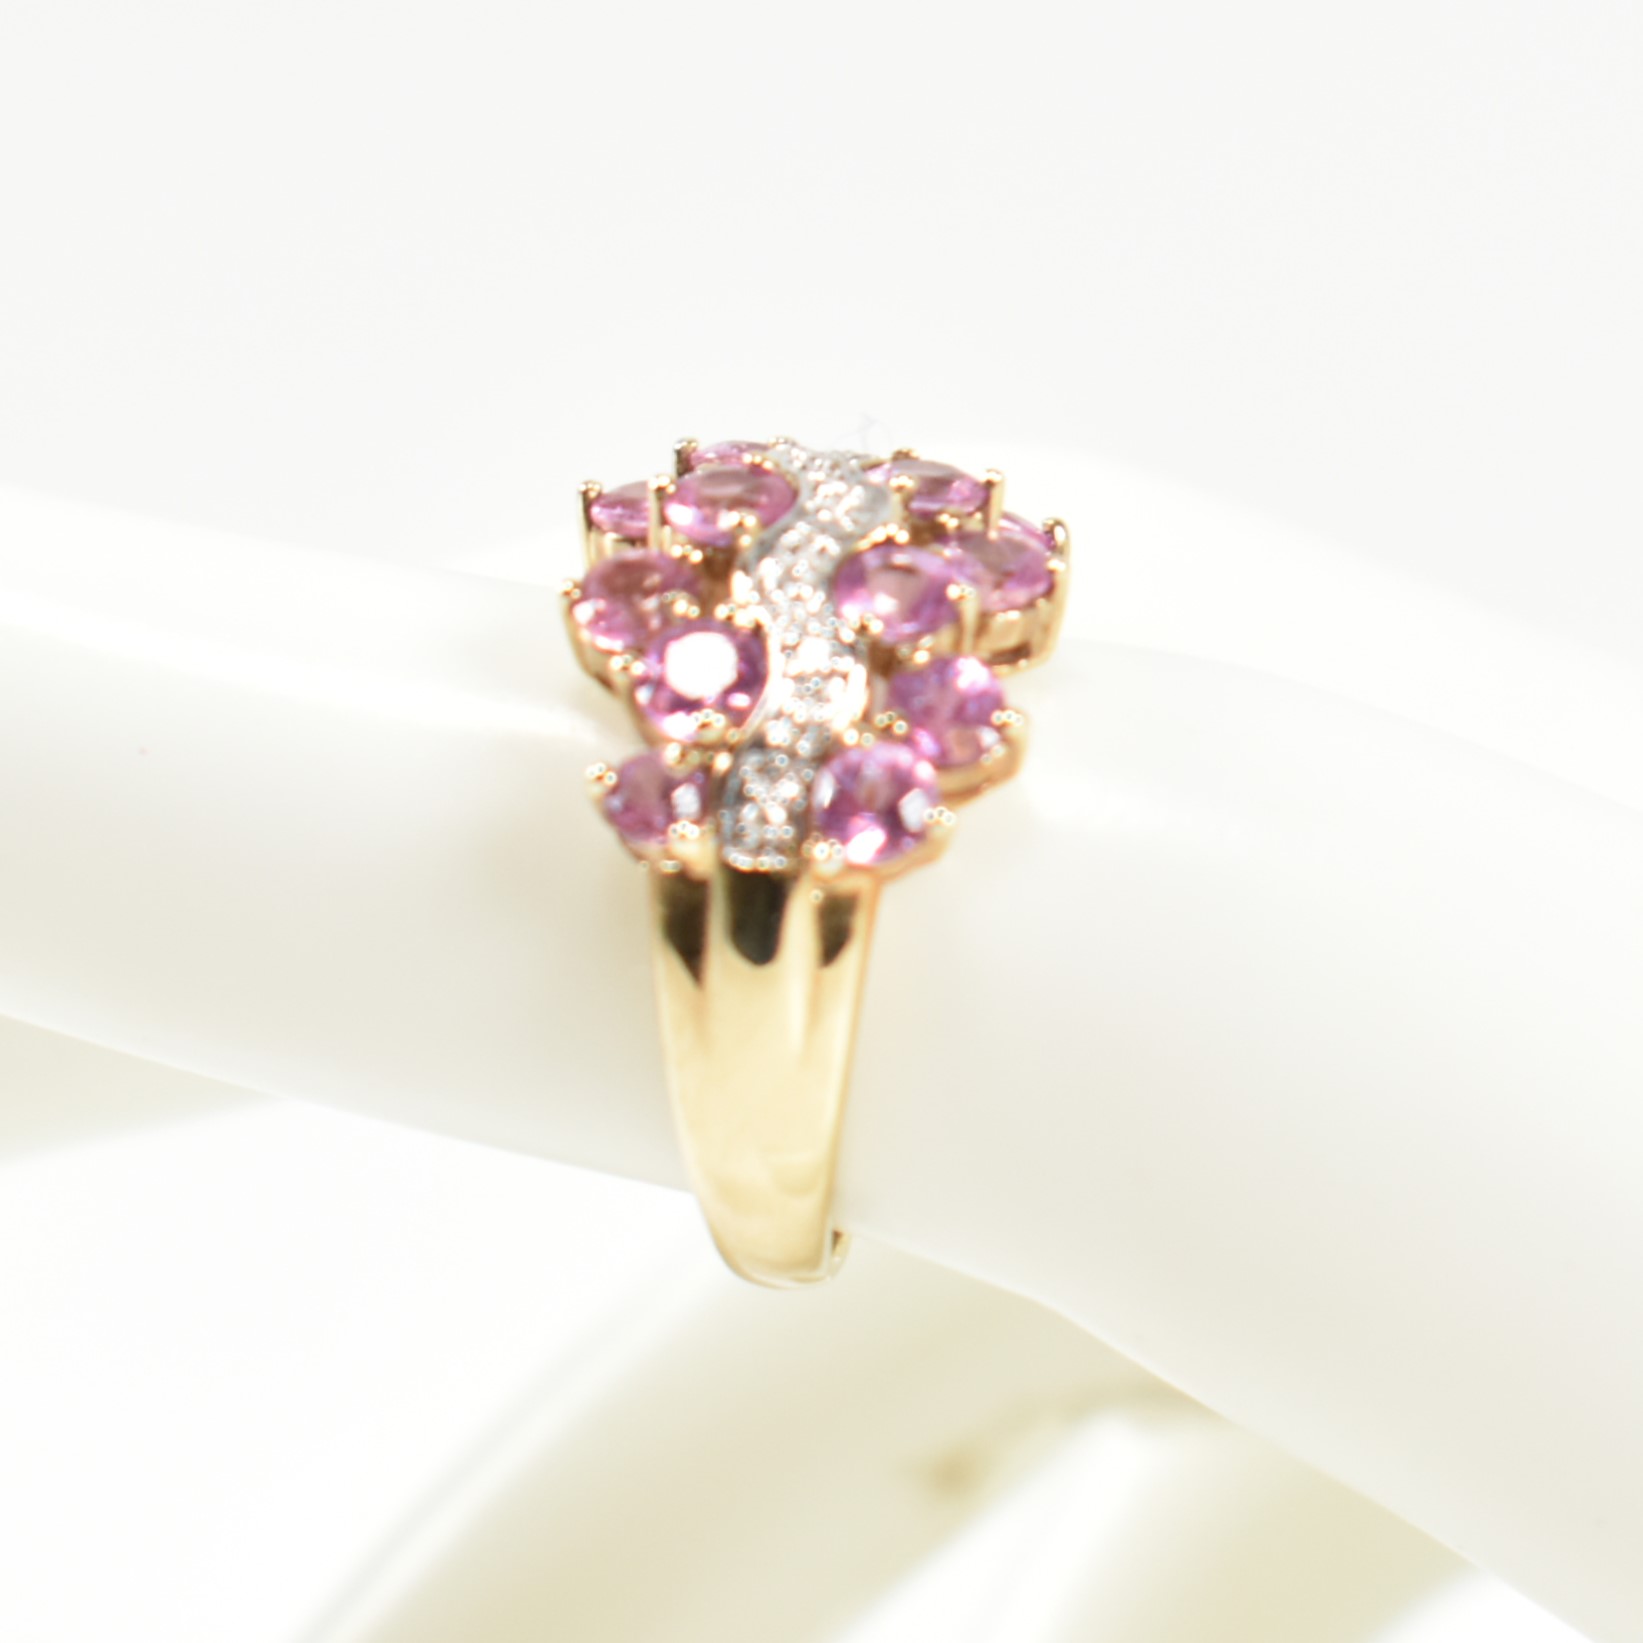 HALLMARKED 9CT GOLD PINK SAPPHIRE & DIAMOND CLUSTER RING - Image 9 of 9